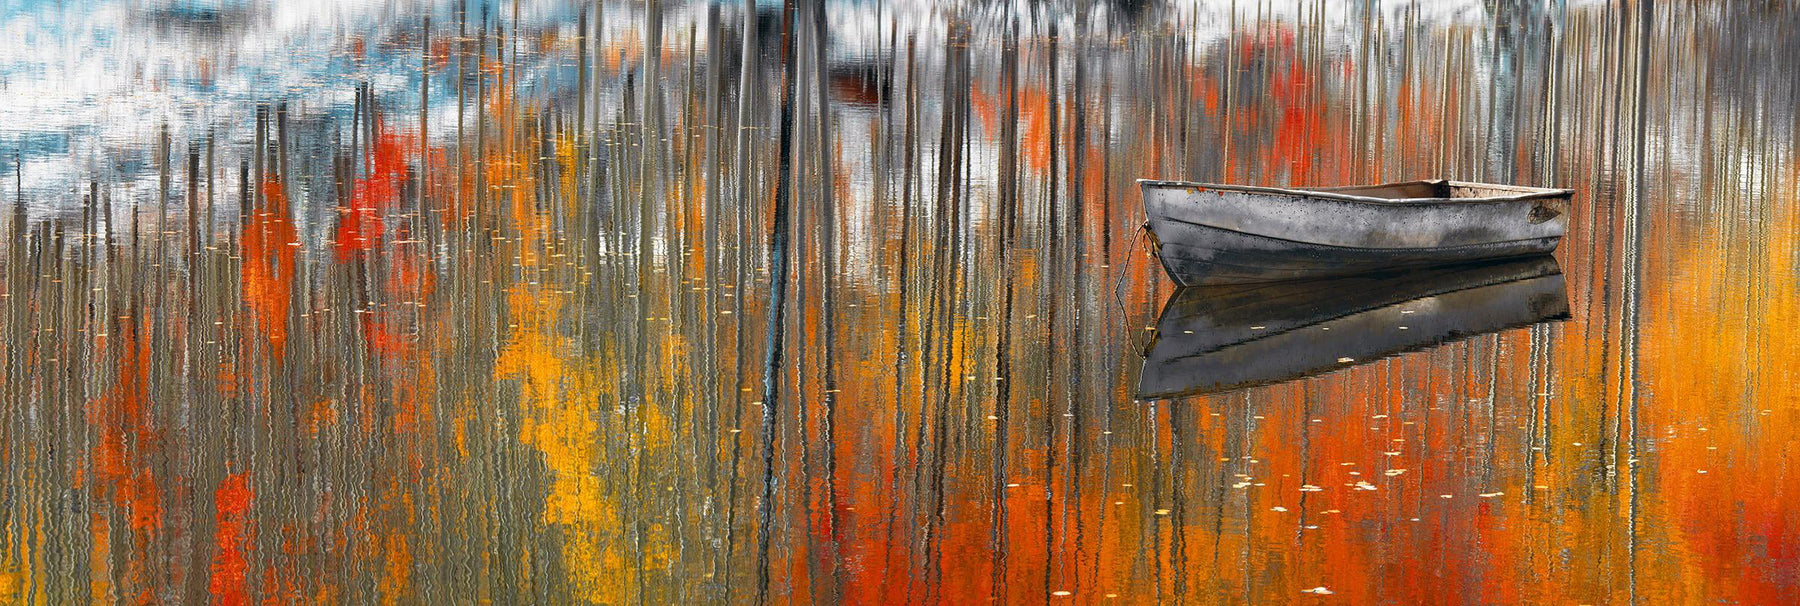 Old metal row boat floating on a lake in Aspen Colorado with the Autumn forest reflecting in the water